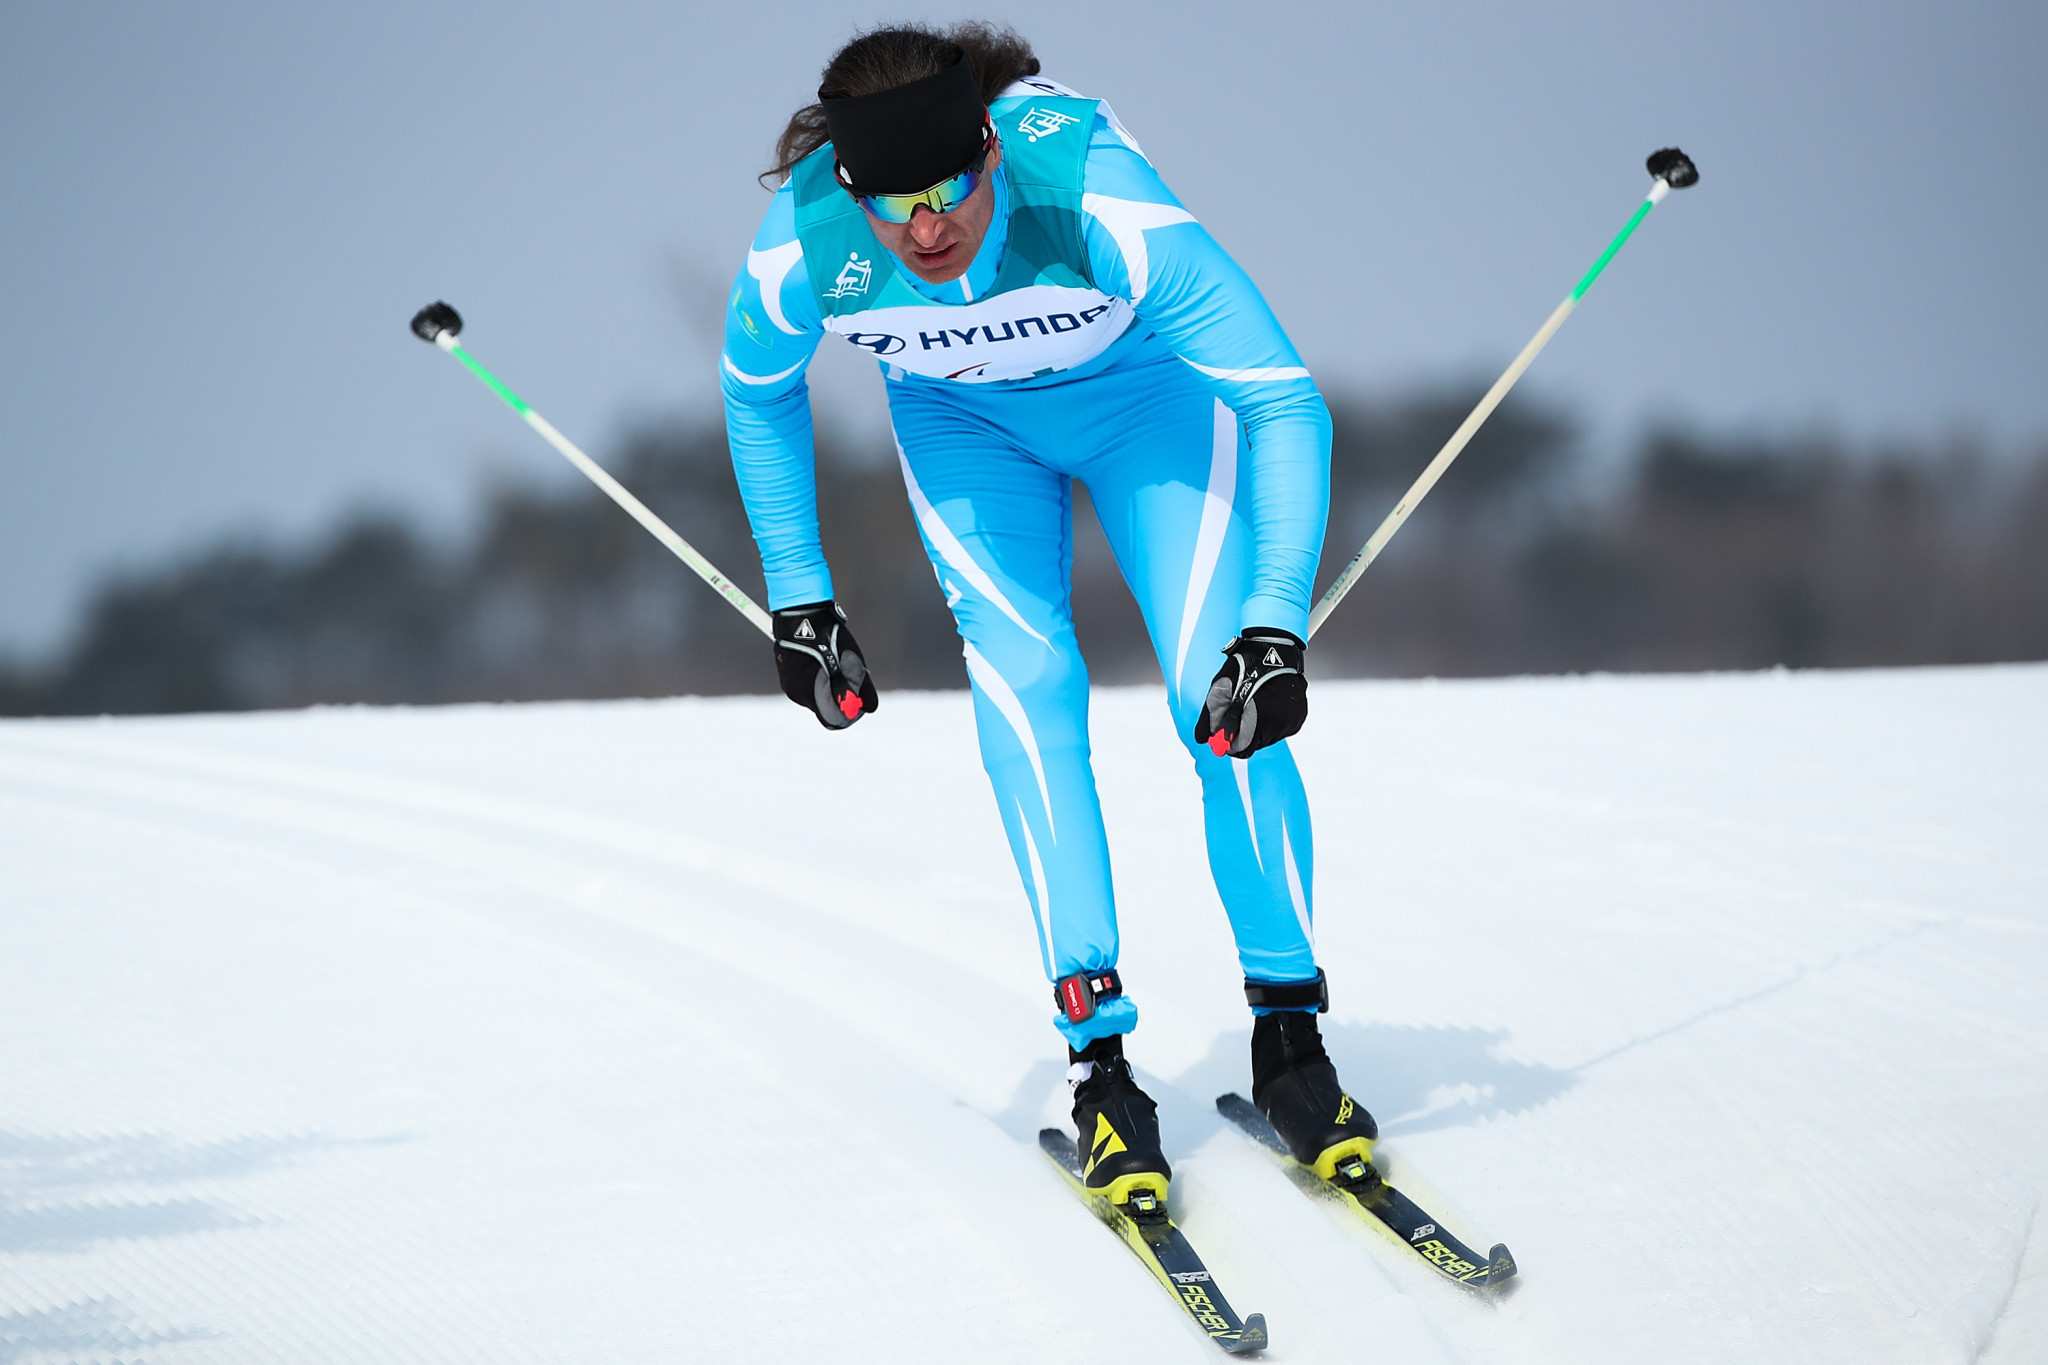 Kazakhstan's Alexander Kolyadin won all three of the races he competed in today ©Getty Images